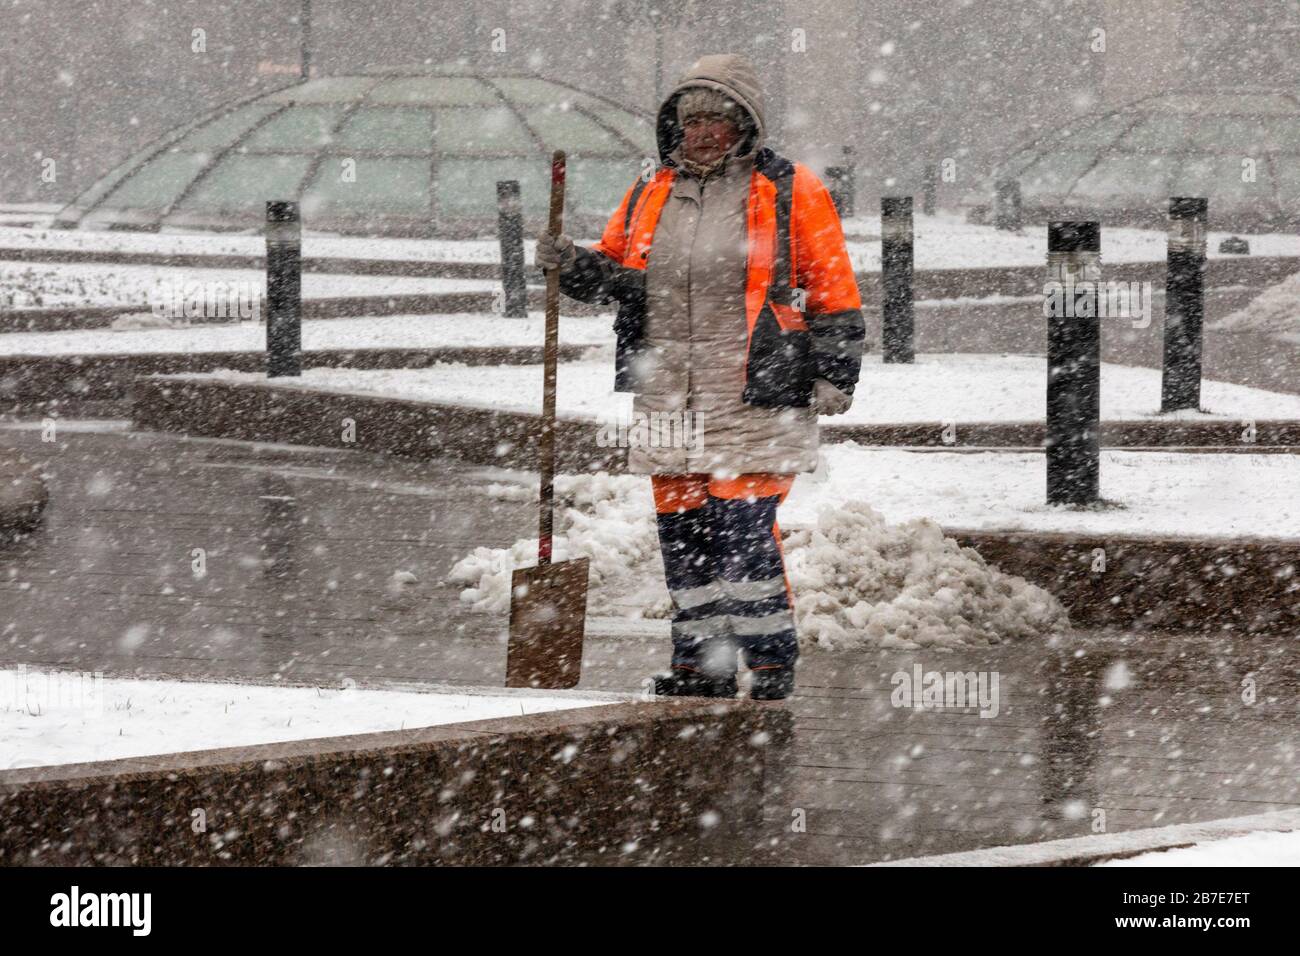 Moscow, Russia - March, 15th, 2020: An employee of communal services removes snow during abnormal snowfall on Manege square in the downtown of Moscow, Russia Stock Photo